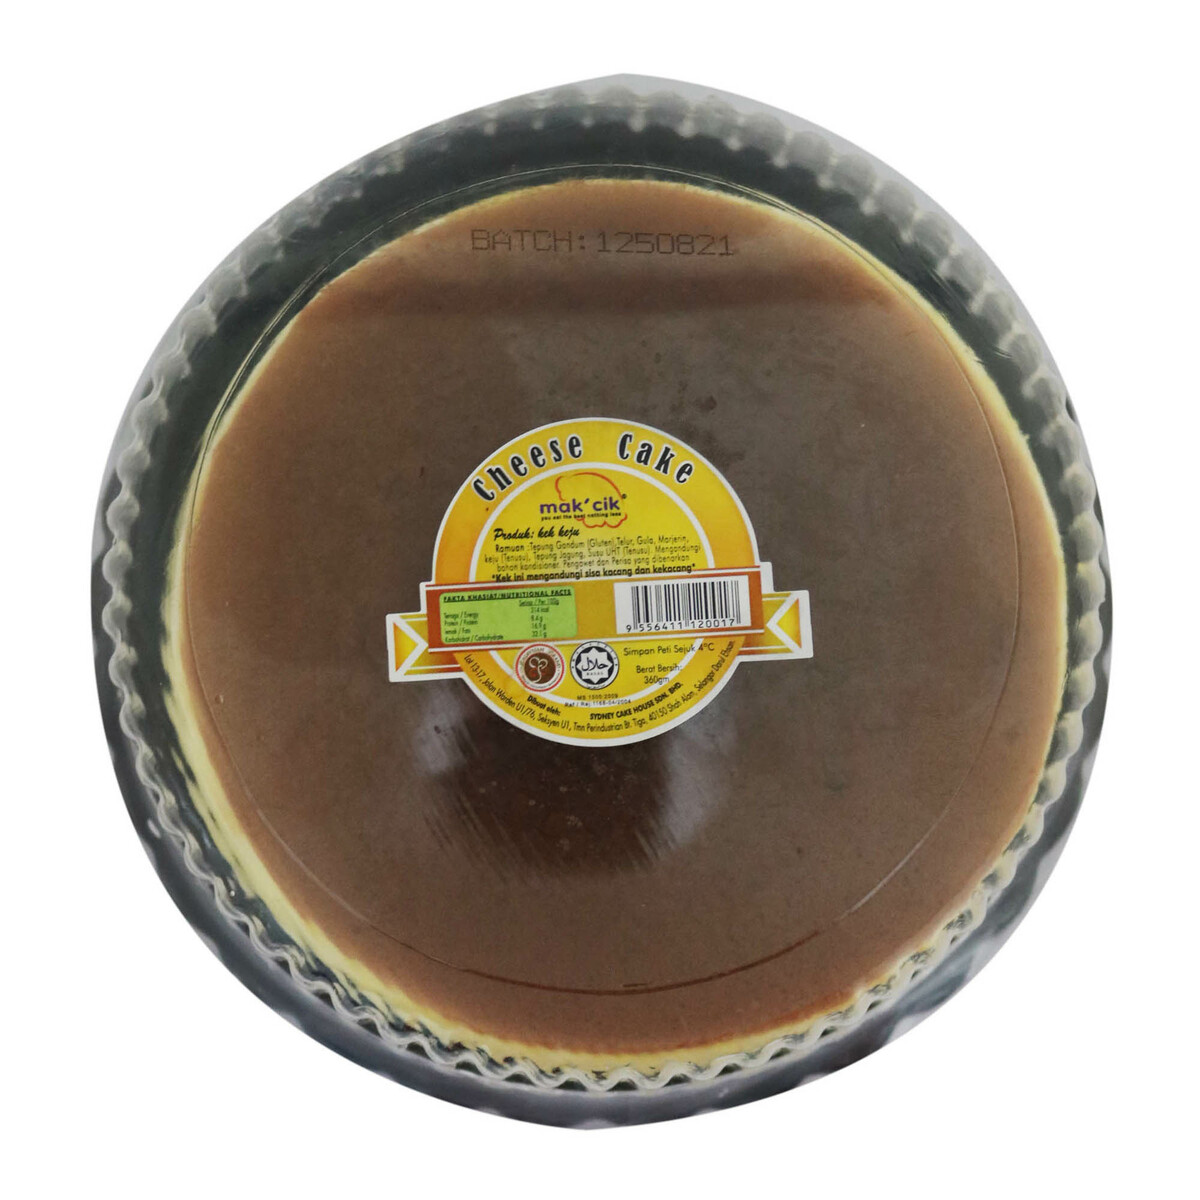 Sydney Bake Cheese Cake 360g Online at Best Price | Brought In Cakes ...